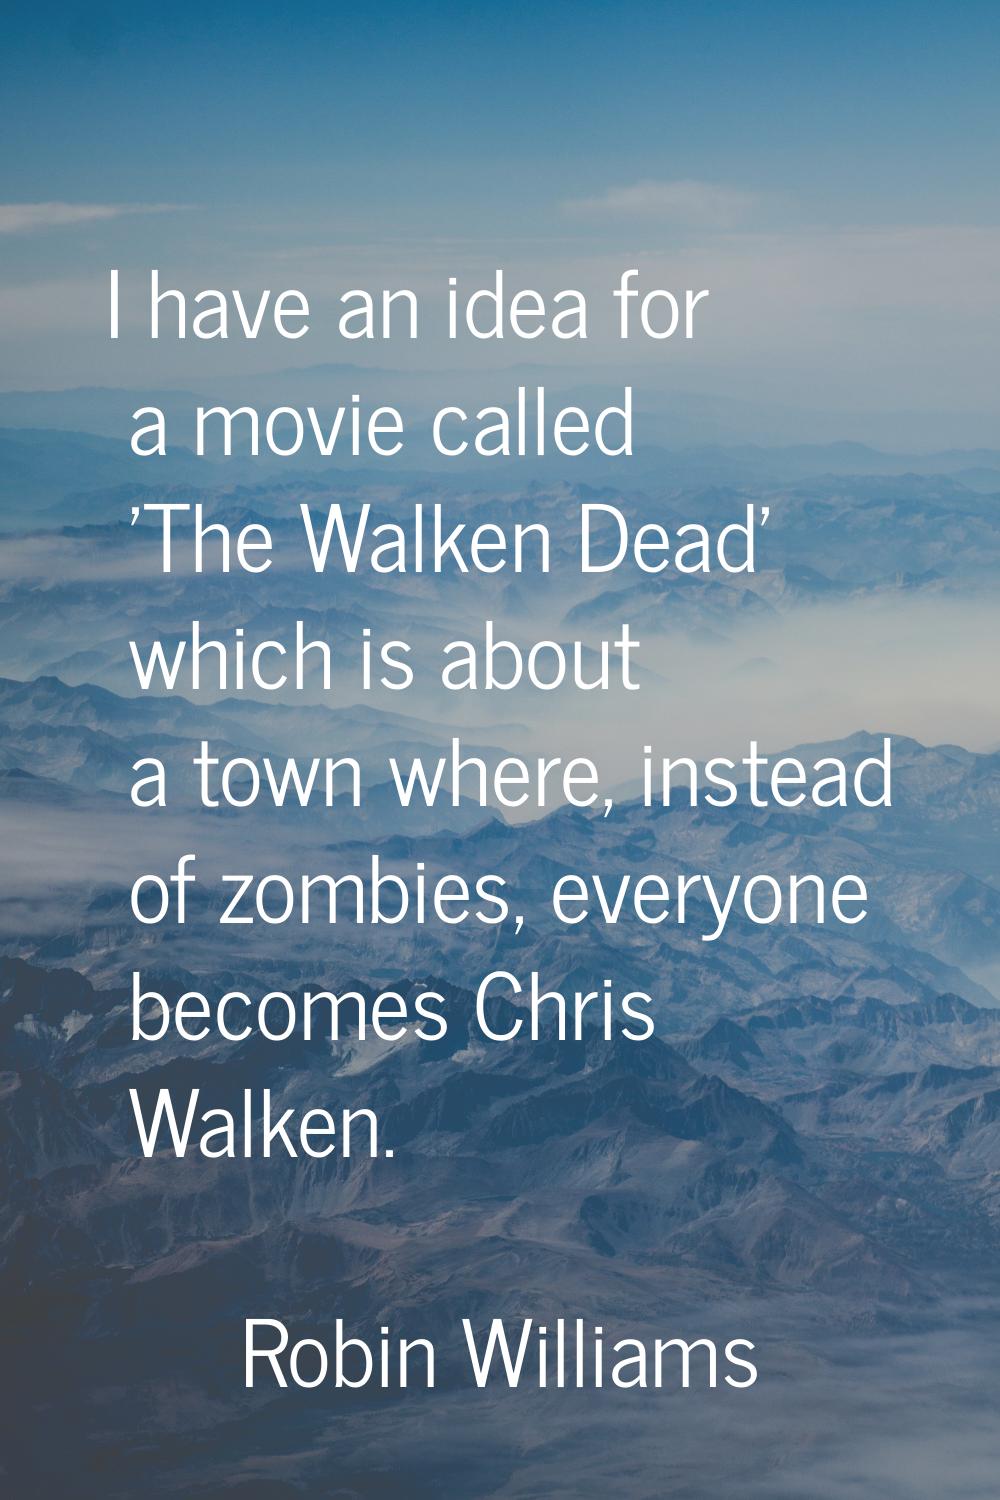 I have an idea for a movie called 'The Walken Dead' which is about a town where, instead of zombies